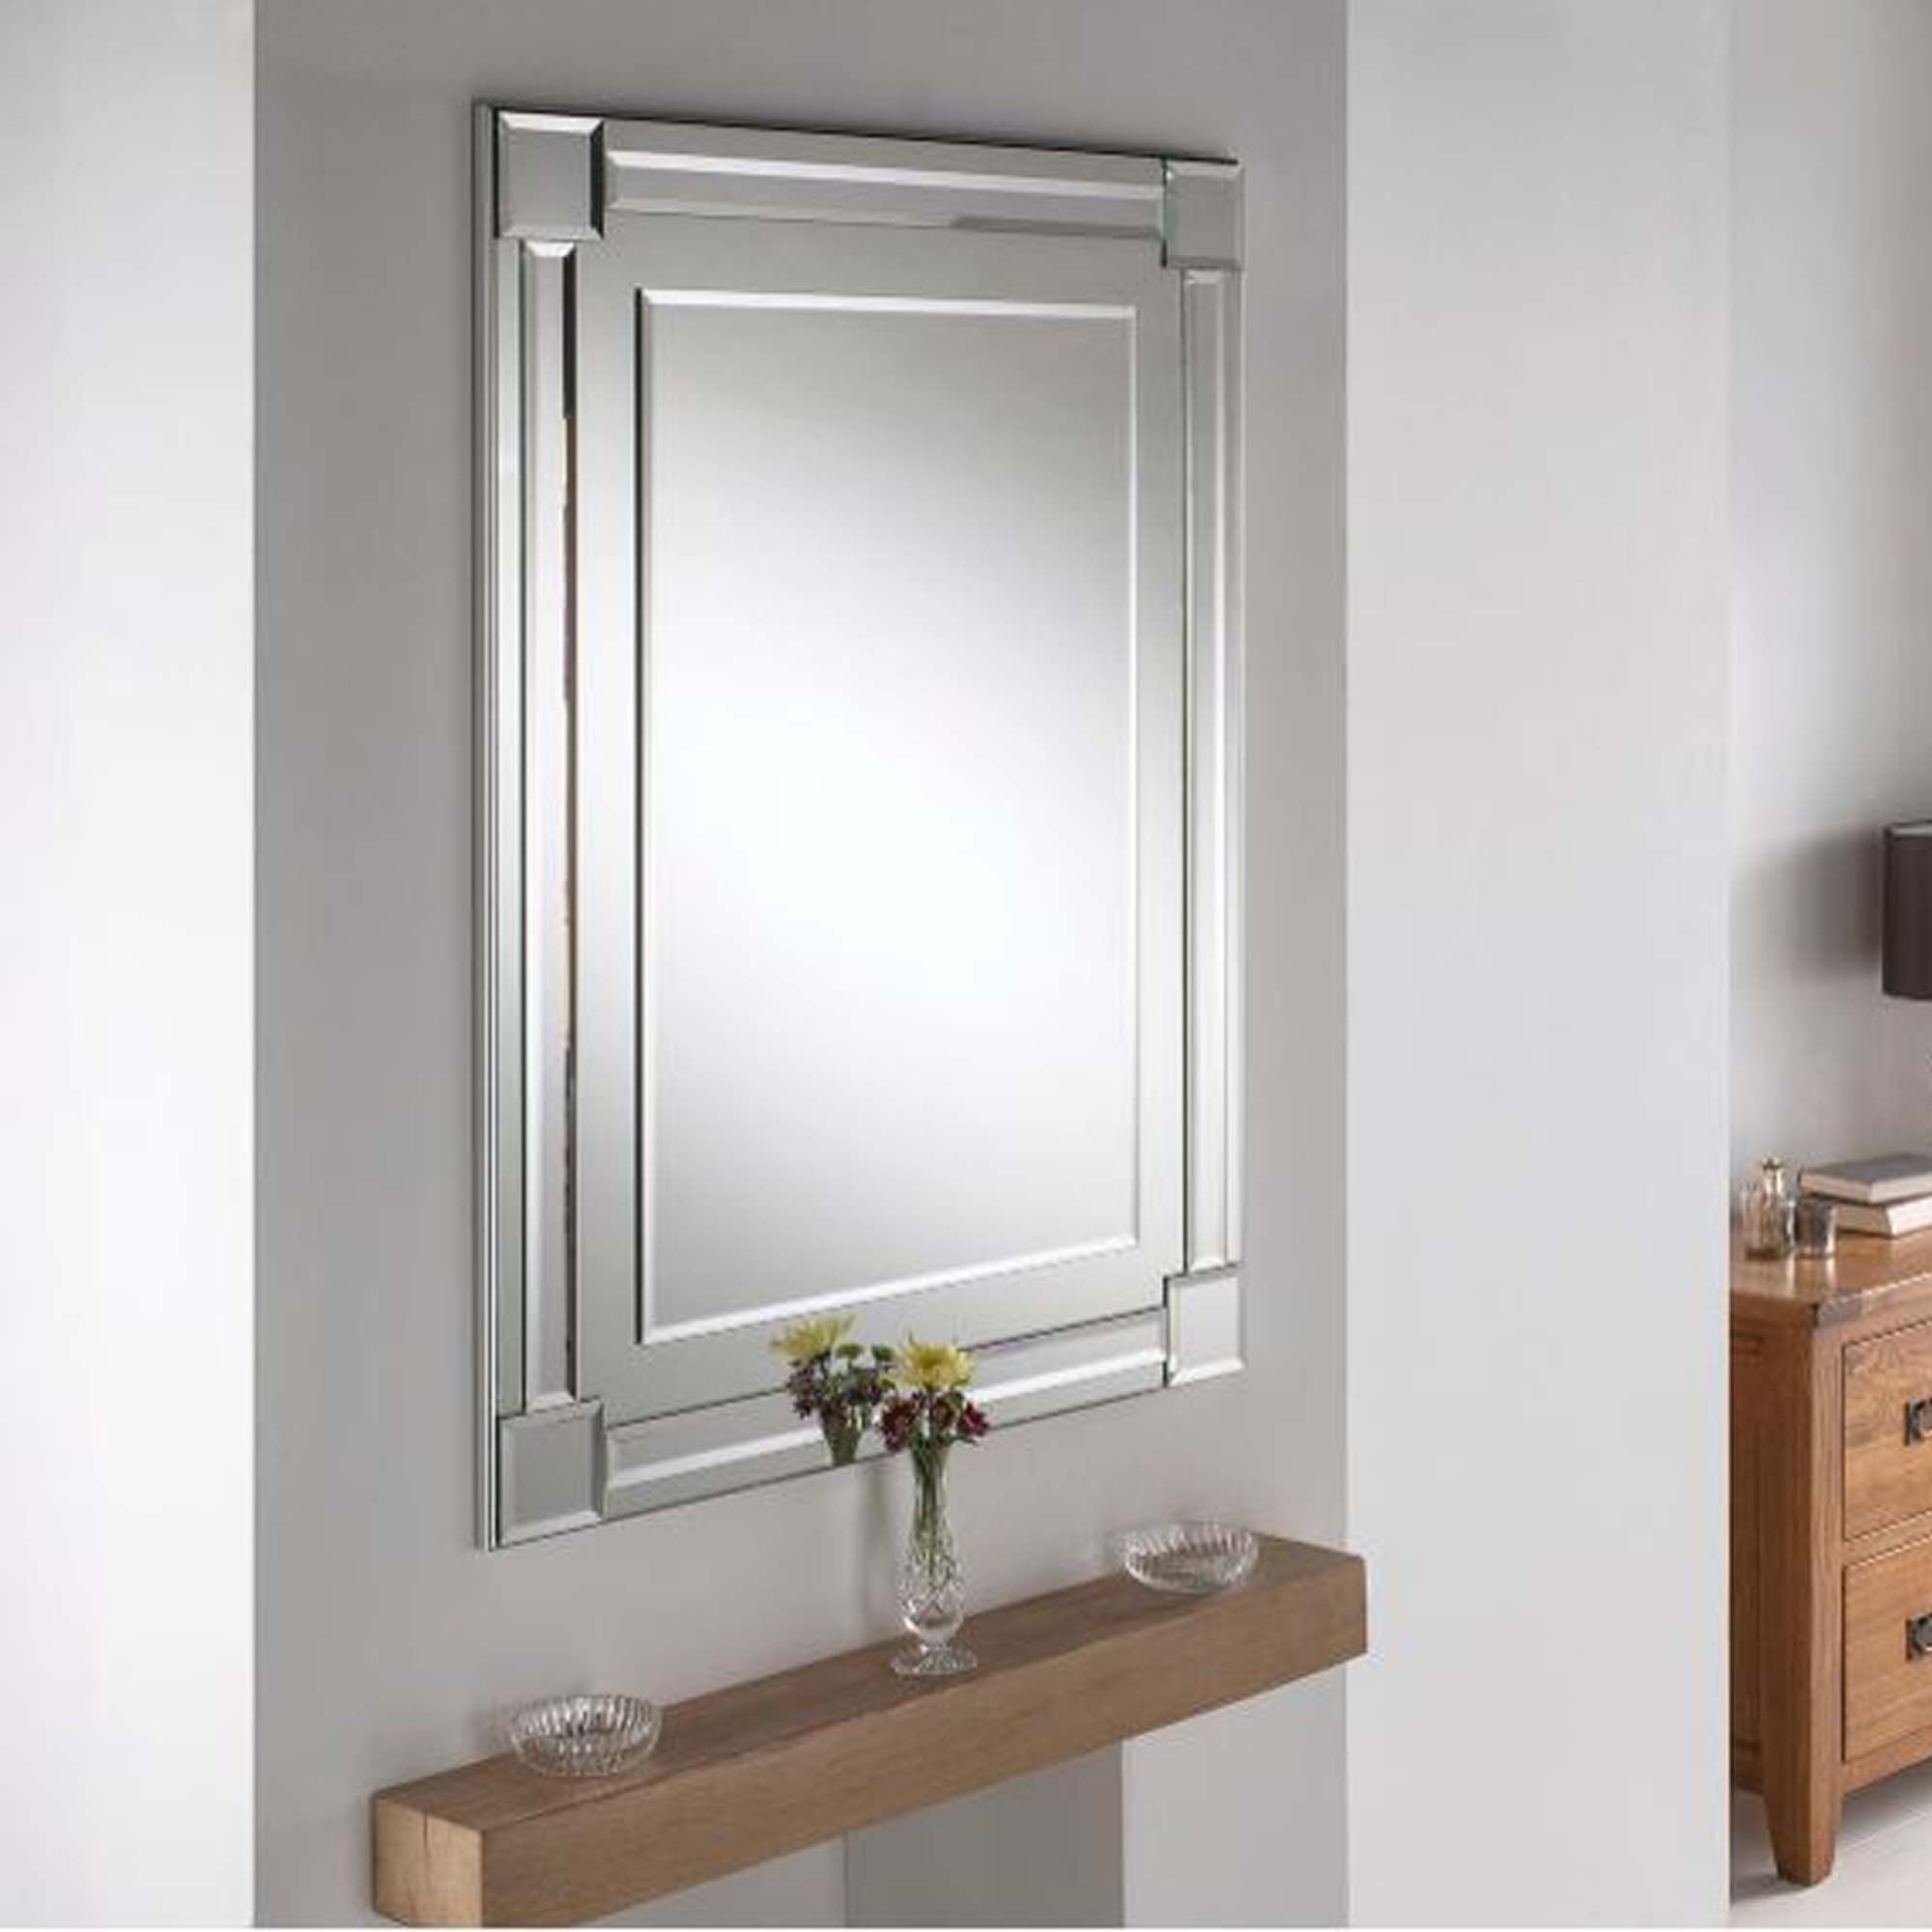 Bevelled Contemporary Rectangular Silver Wall Mirror | Homesdirect365 With Regard To Rectangular Grid Wall Mirrors (View 11 of 15)